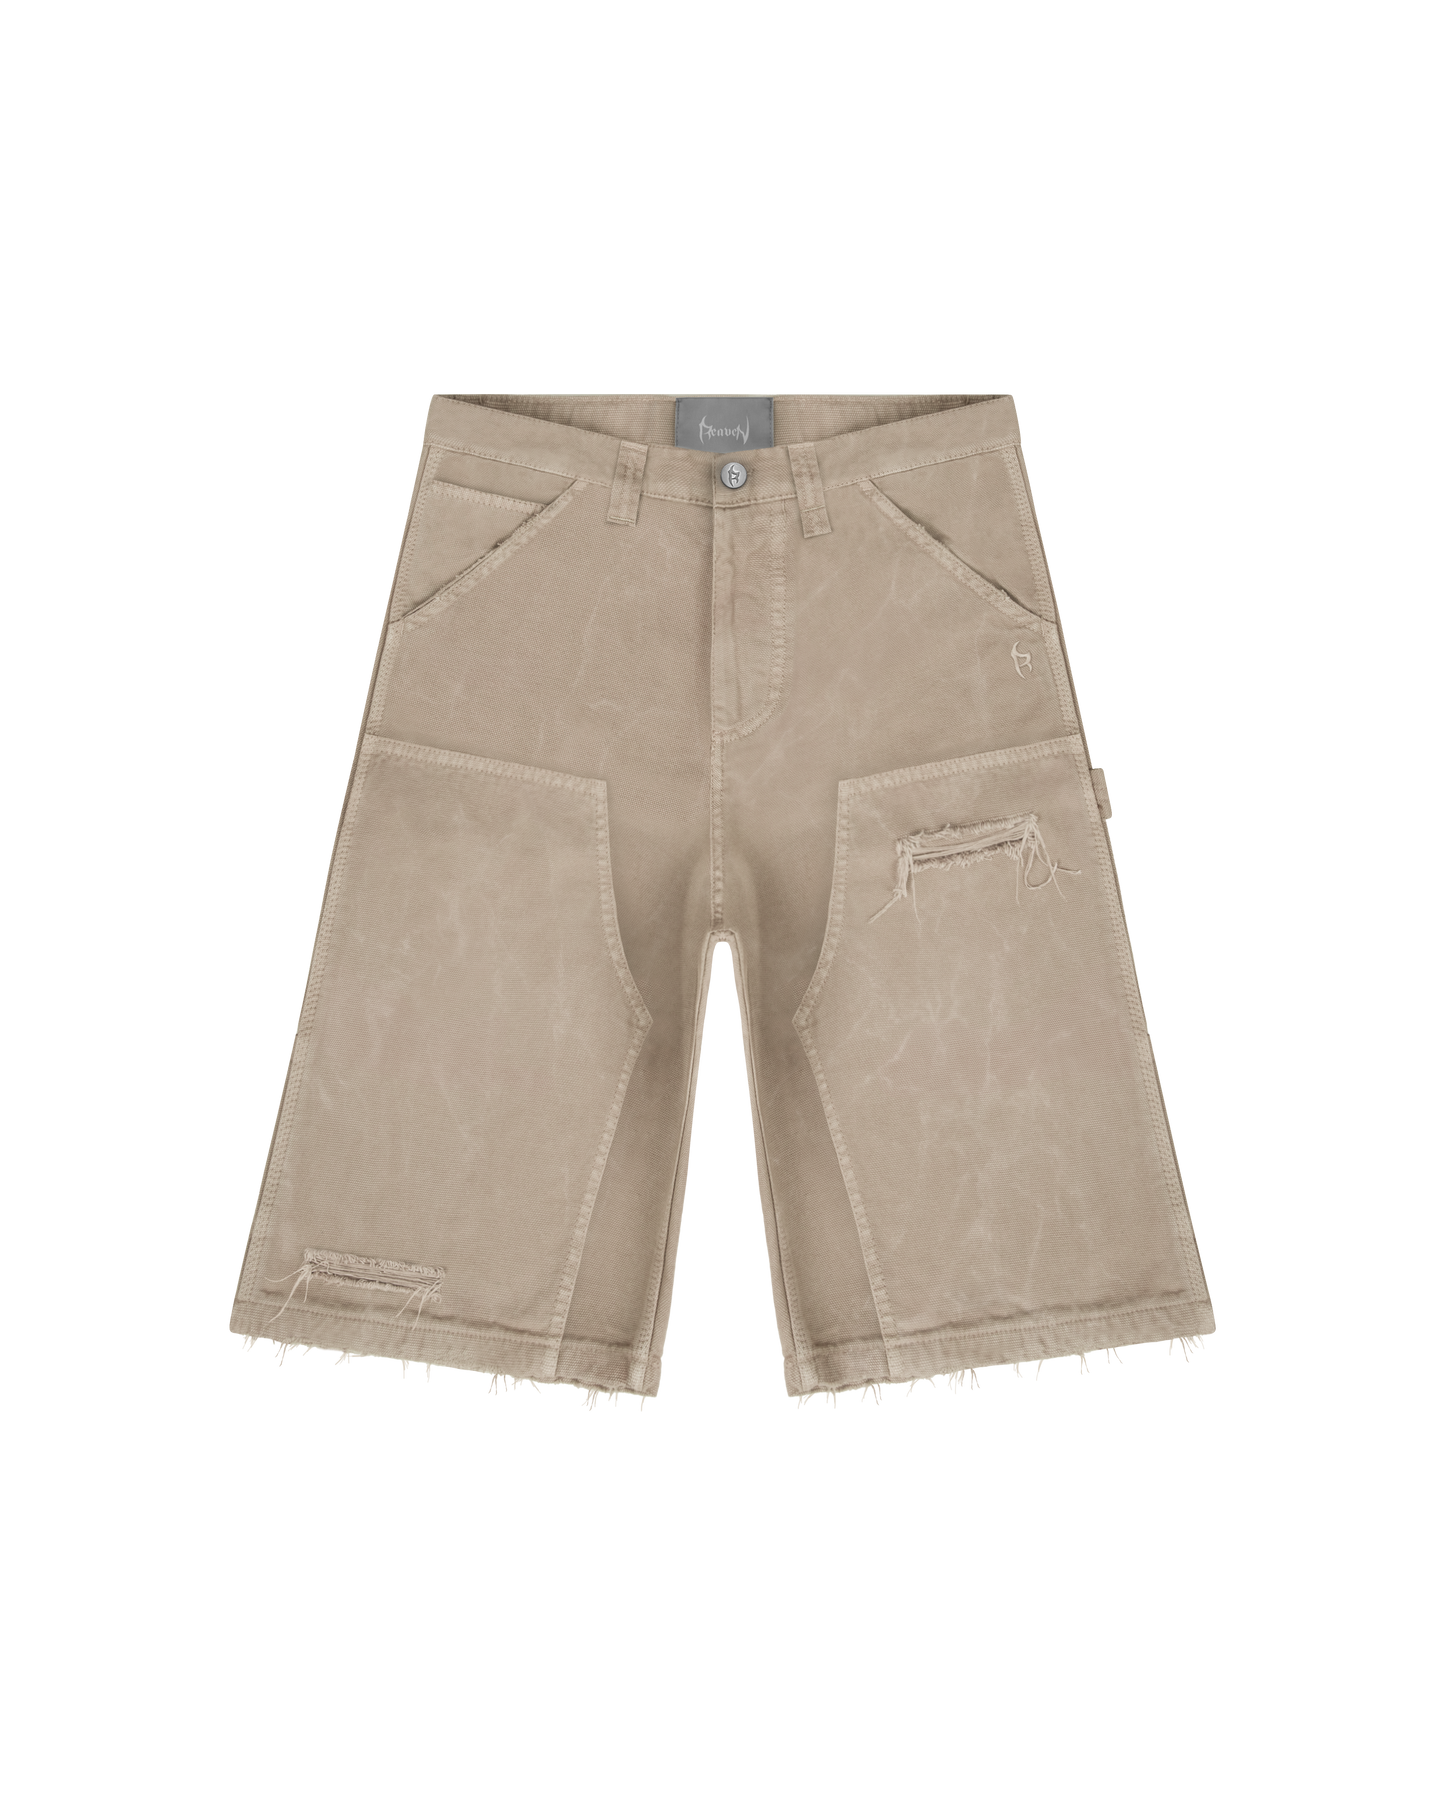 Reaven Sand Double Knee Shorts